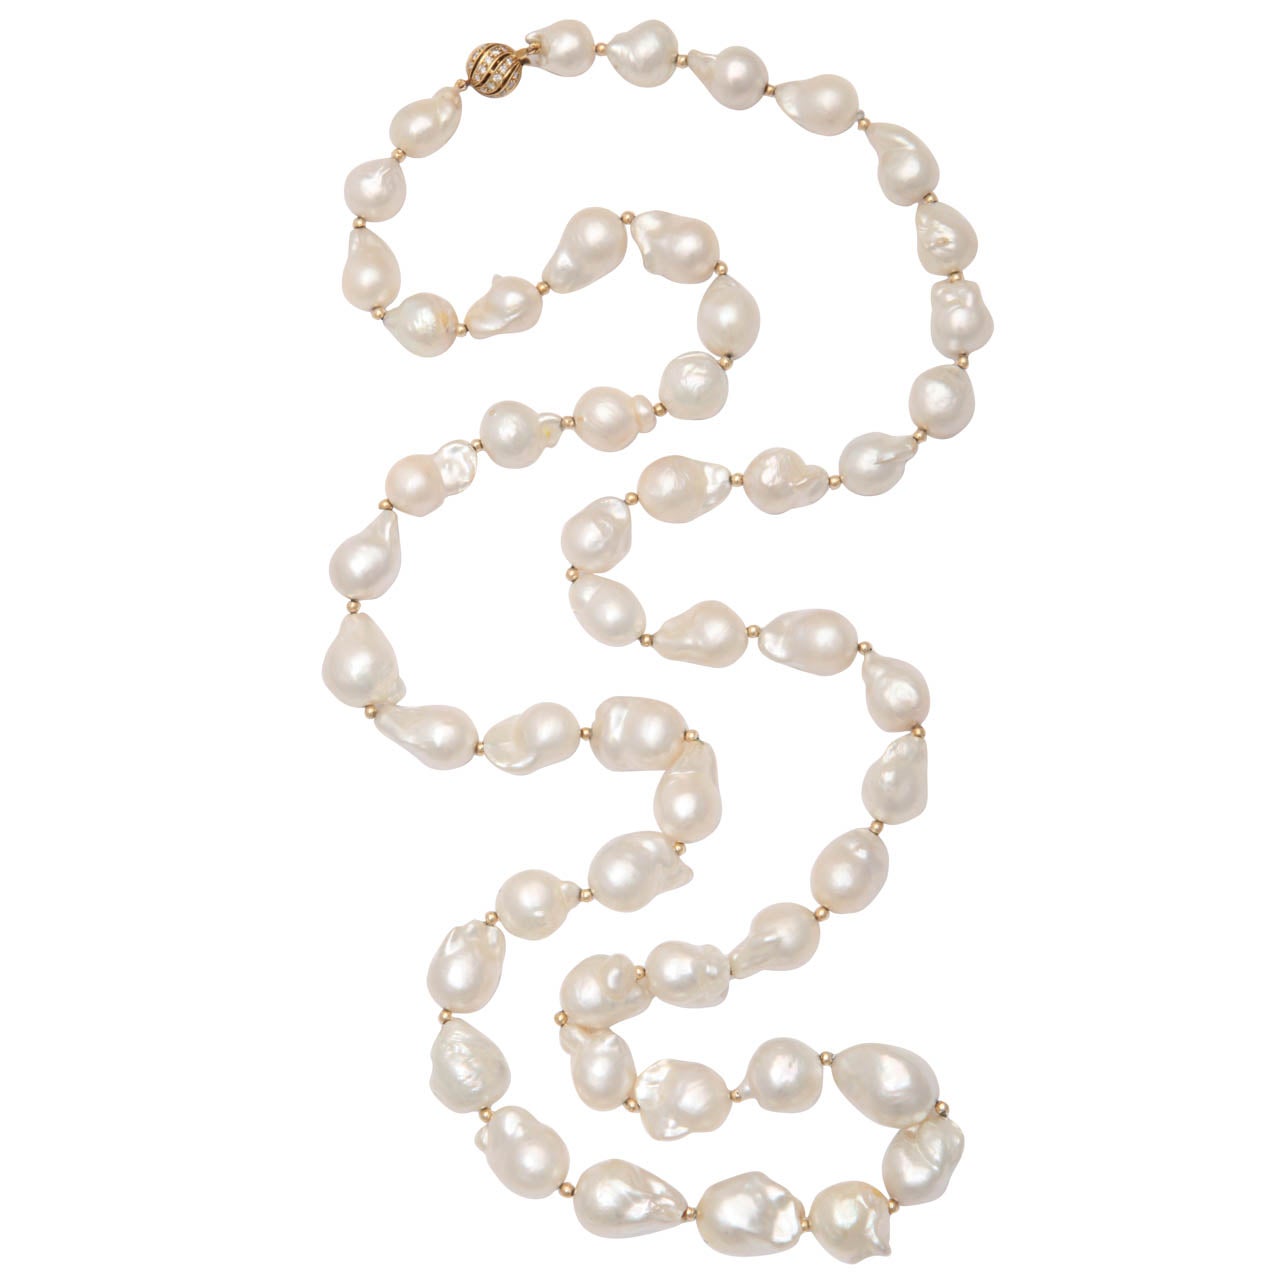 Baroque South Sea Pearl Necklace with Diamond Clasp